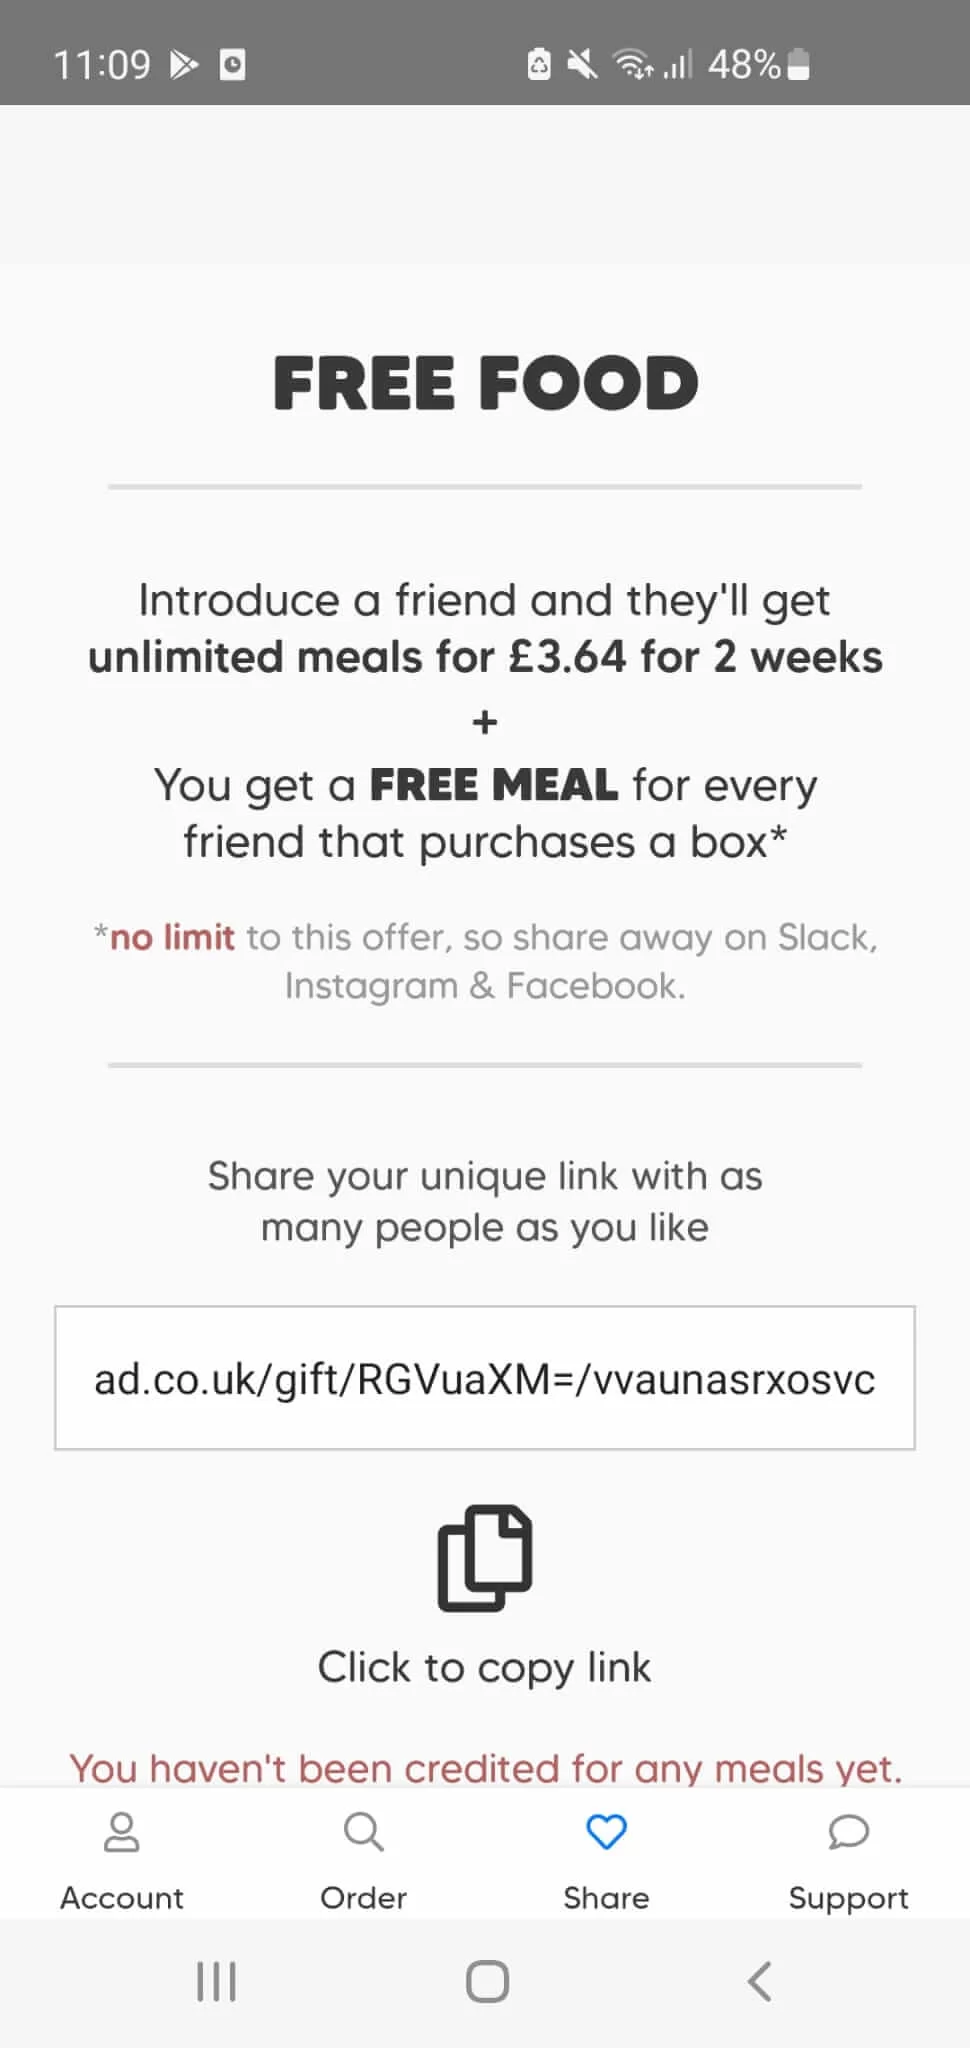 DAD food app refer a friend invitation, give 25% off for 2 weeks, get a free meal